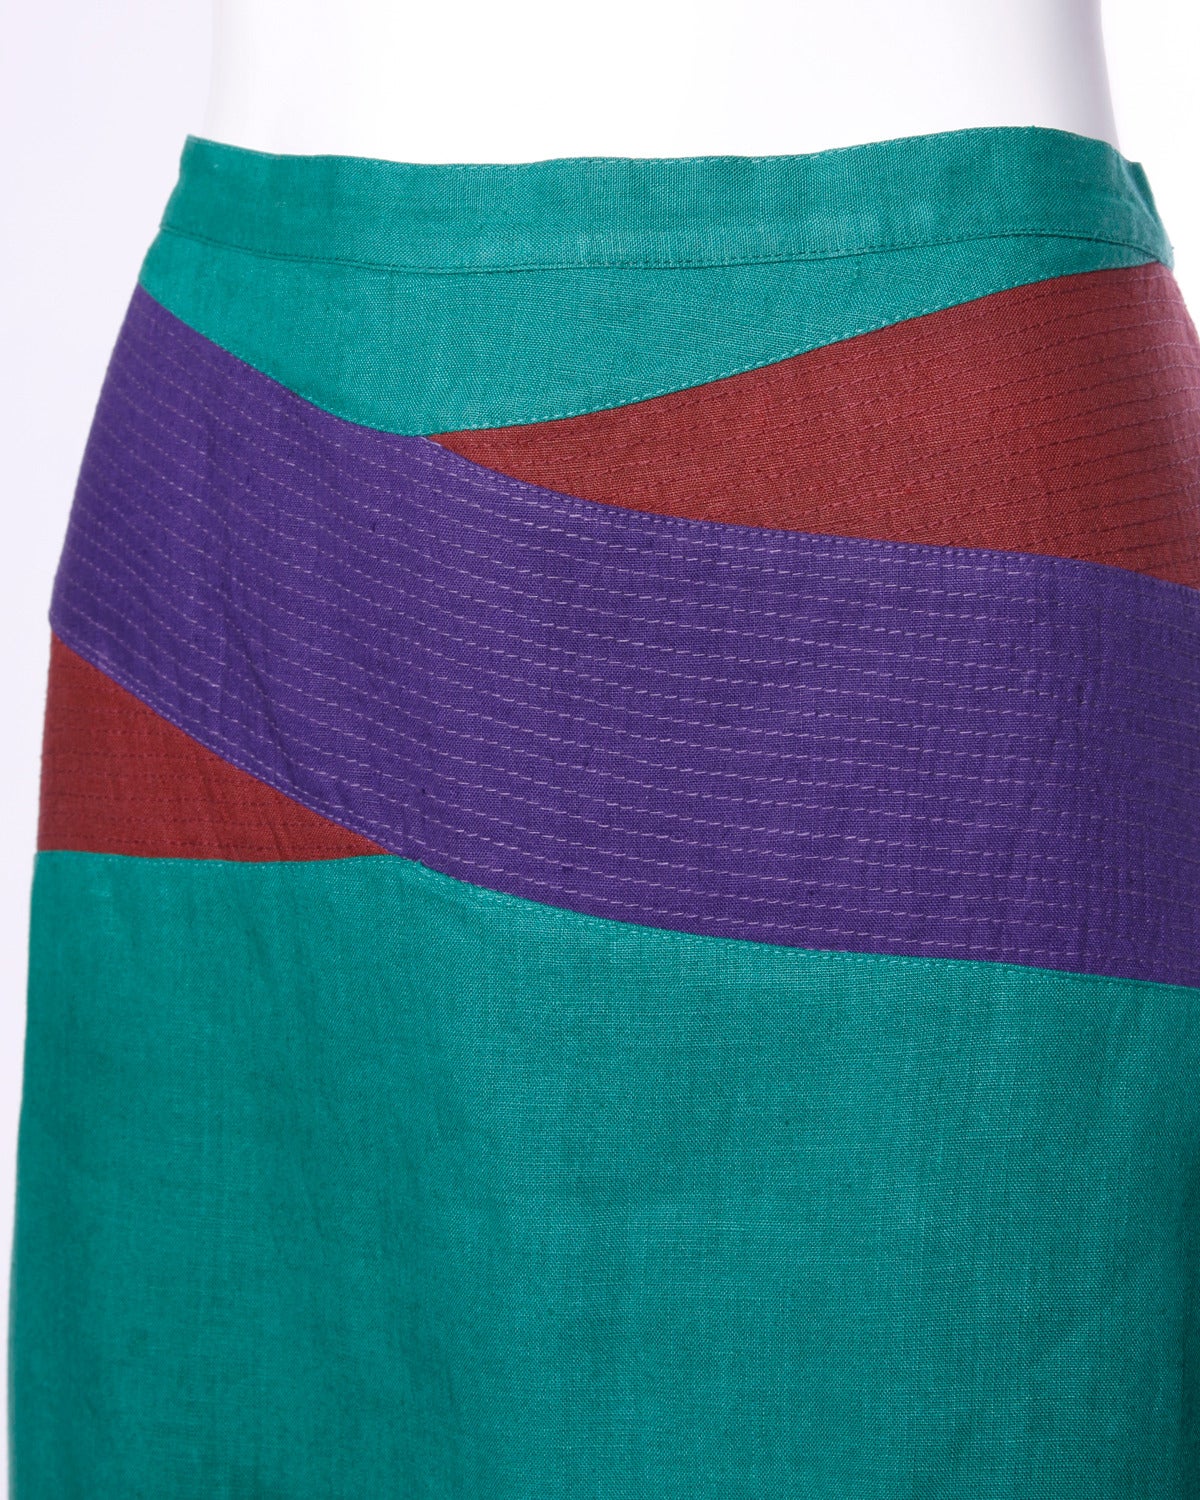 Vintage linen color block skirt by Gianfranco Ferre in green, purple and burgundy.

Details:

Fully Lined
Back Zip Button and Snap Closure
Marked Size: 44
Color: Green/ Purple/ Burgundy
Fabric: Linen
Label: Gianfranco